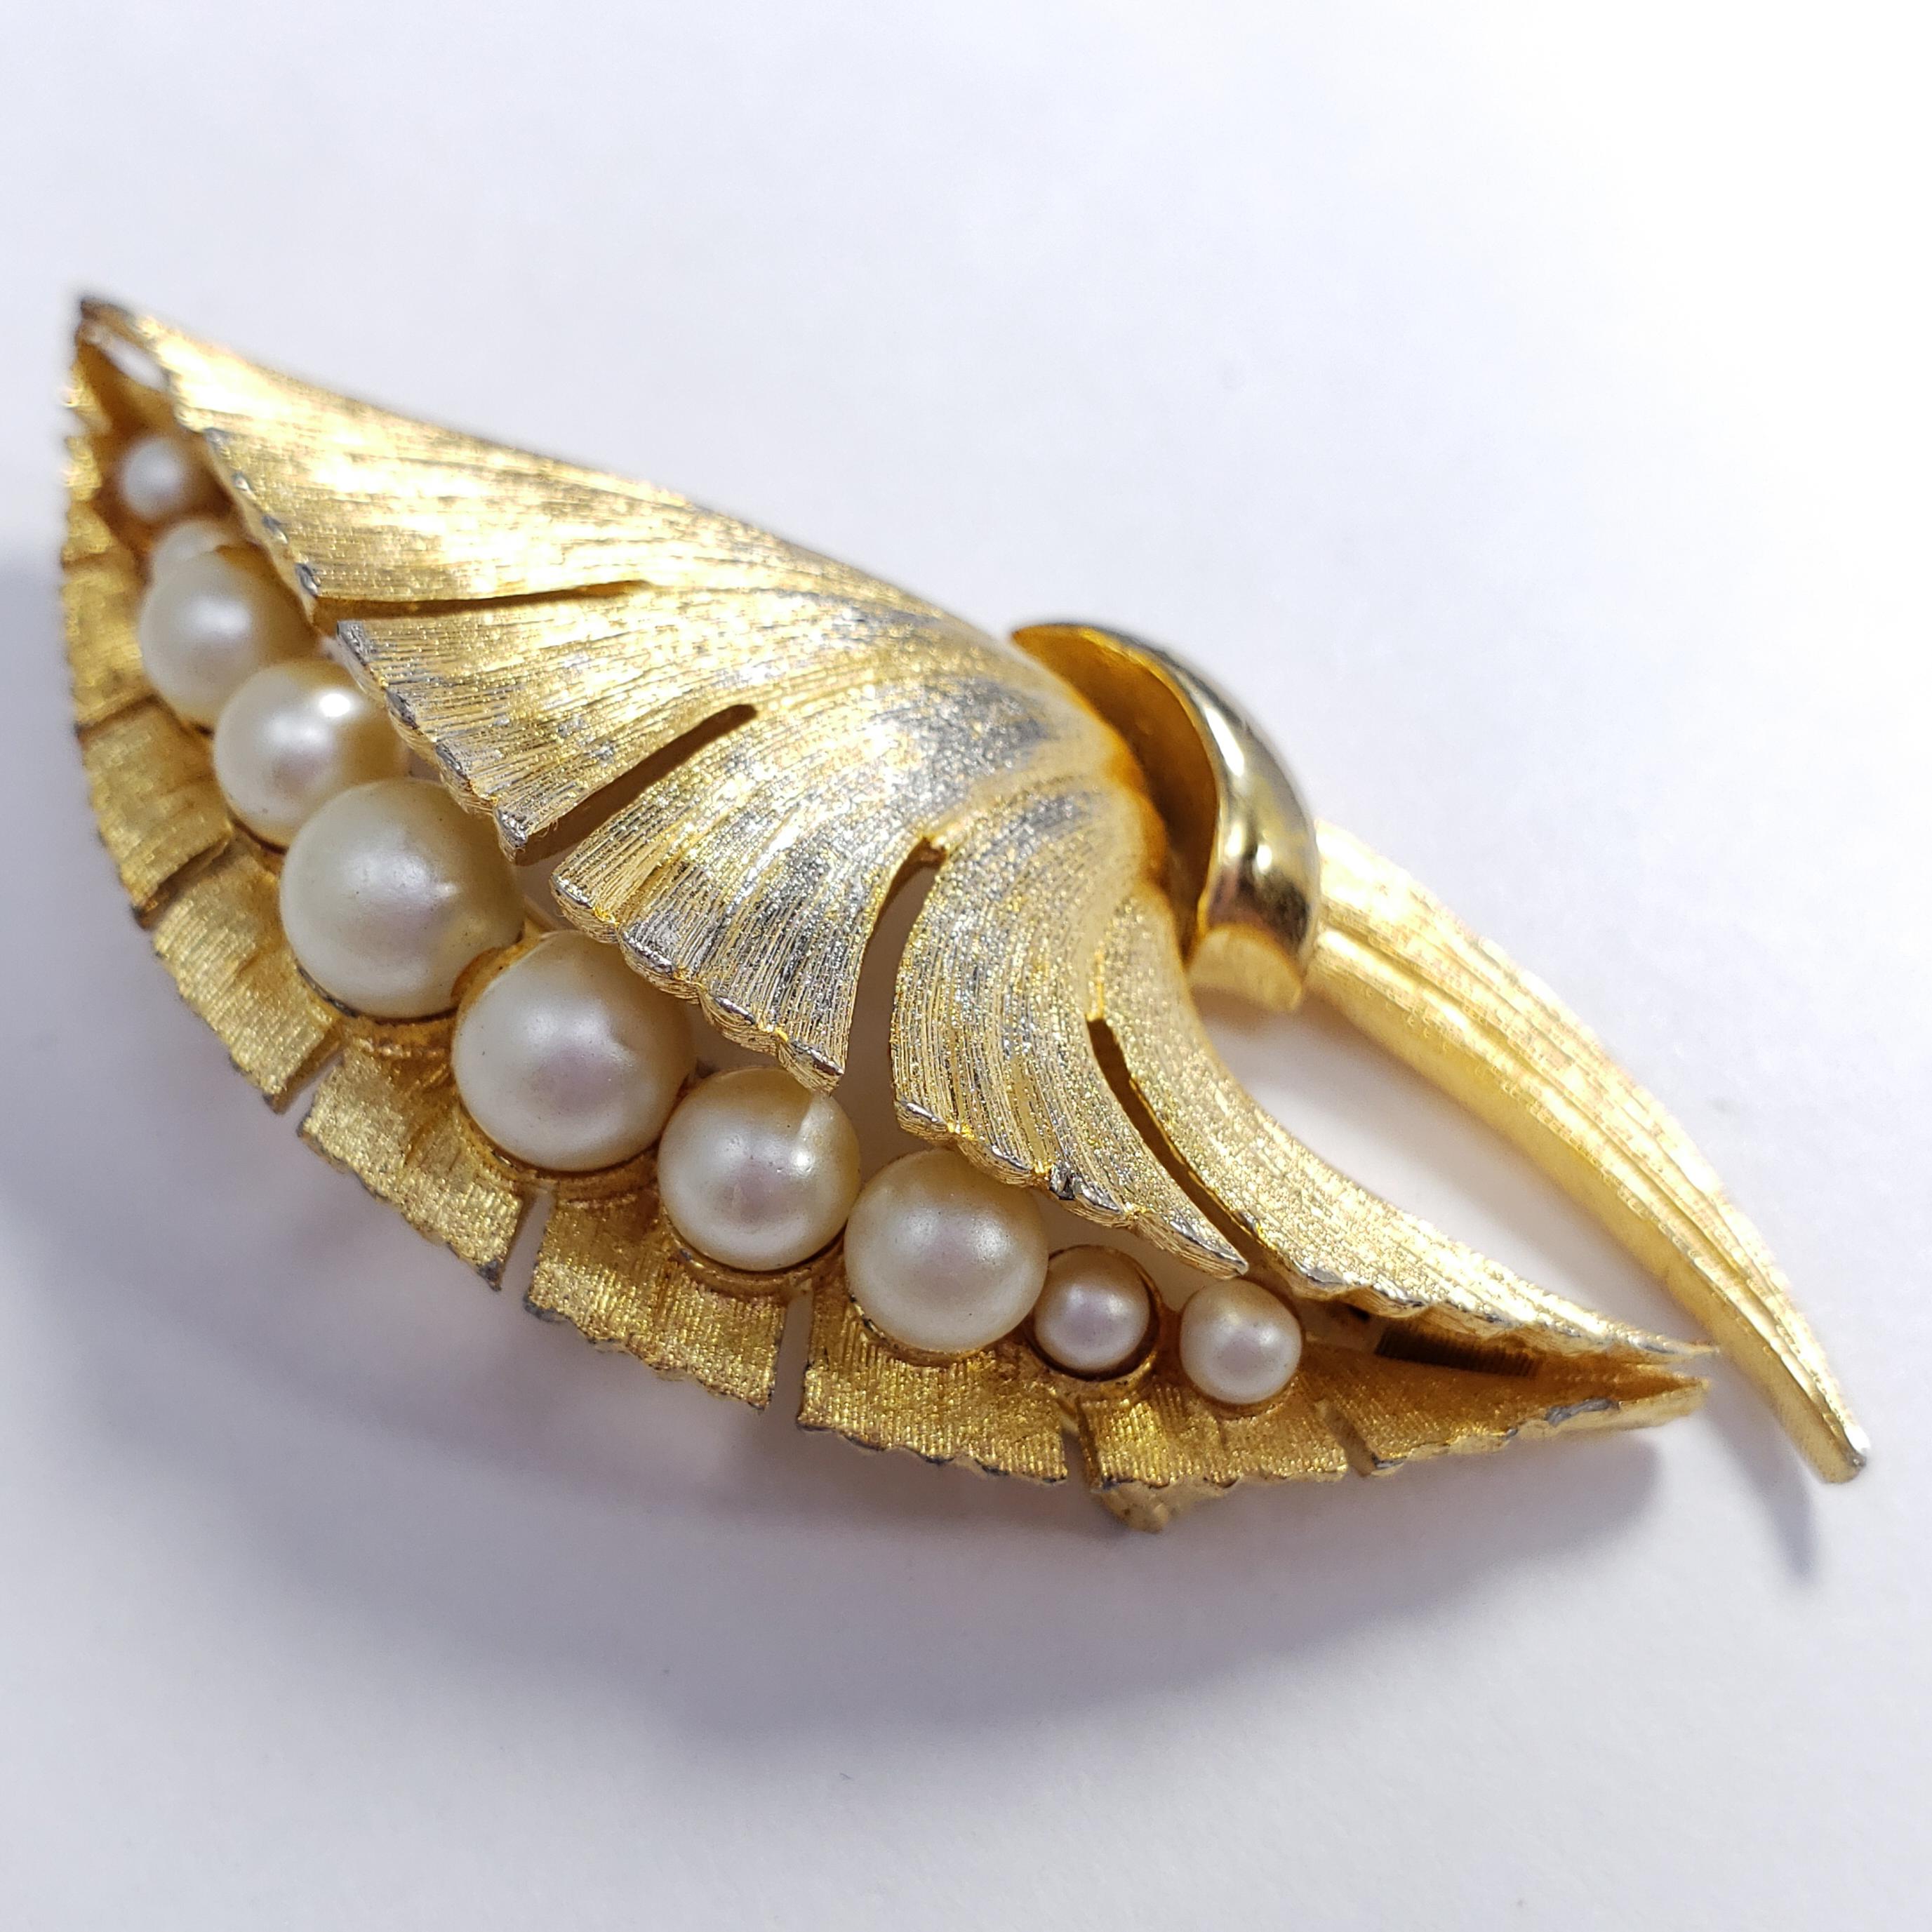 A vintage brooch by designer Sovereign. Features a line of faux pearls in a gold-plated bouquet-like motif. A classy accessory!

Some wear of gold plating is visible.